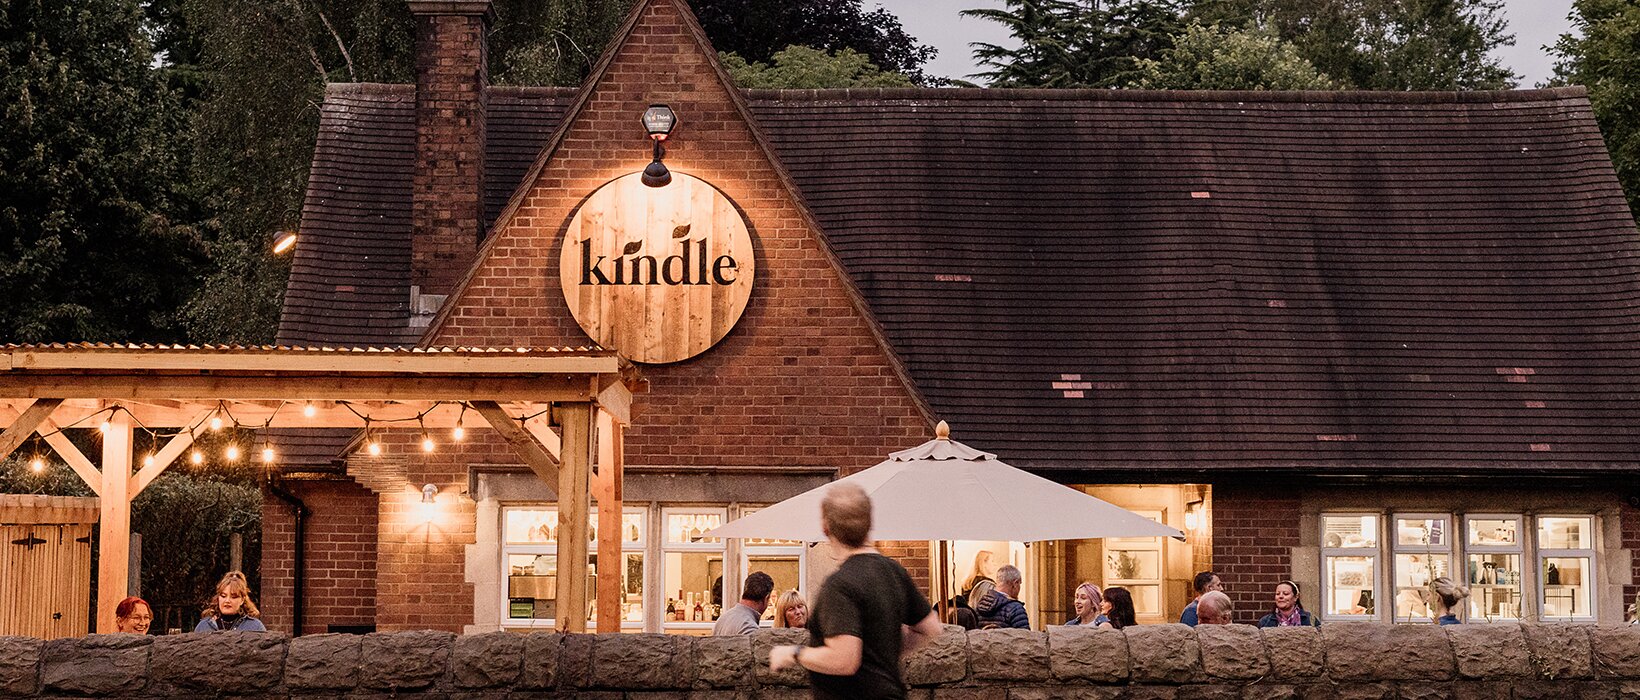 Sustainability-focused restaurant Kindle in Cardiff the latest to close due to 'industry struggles'